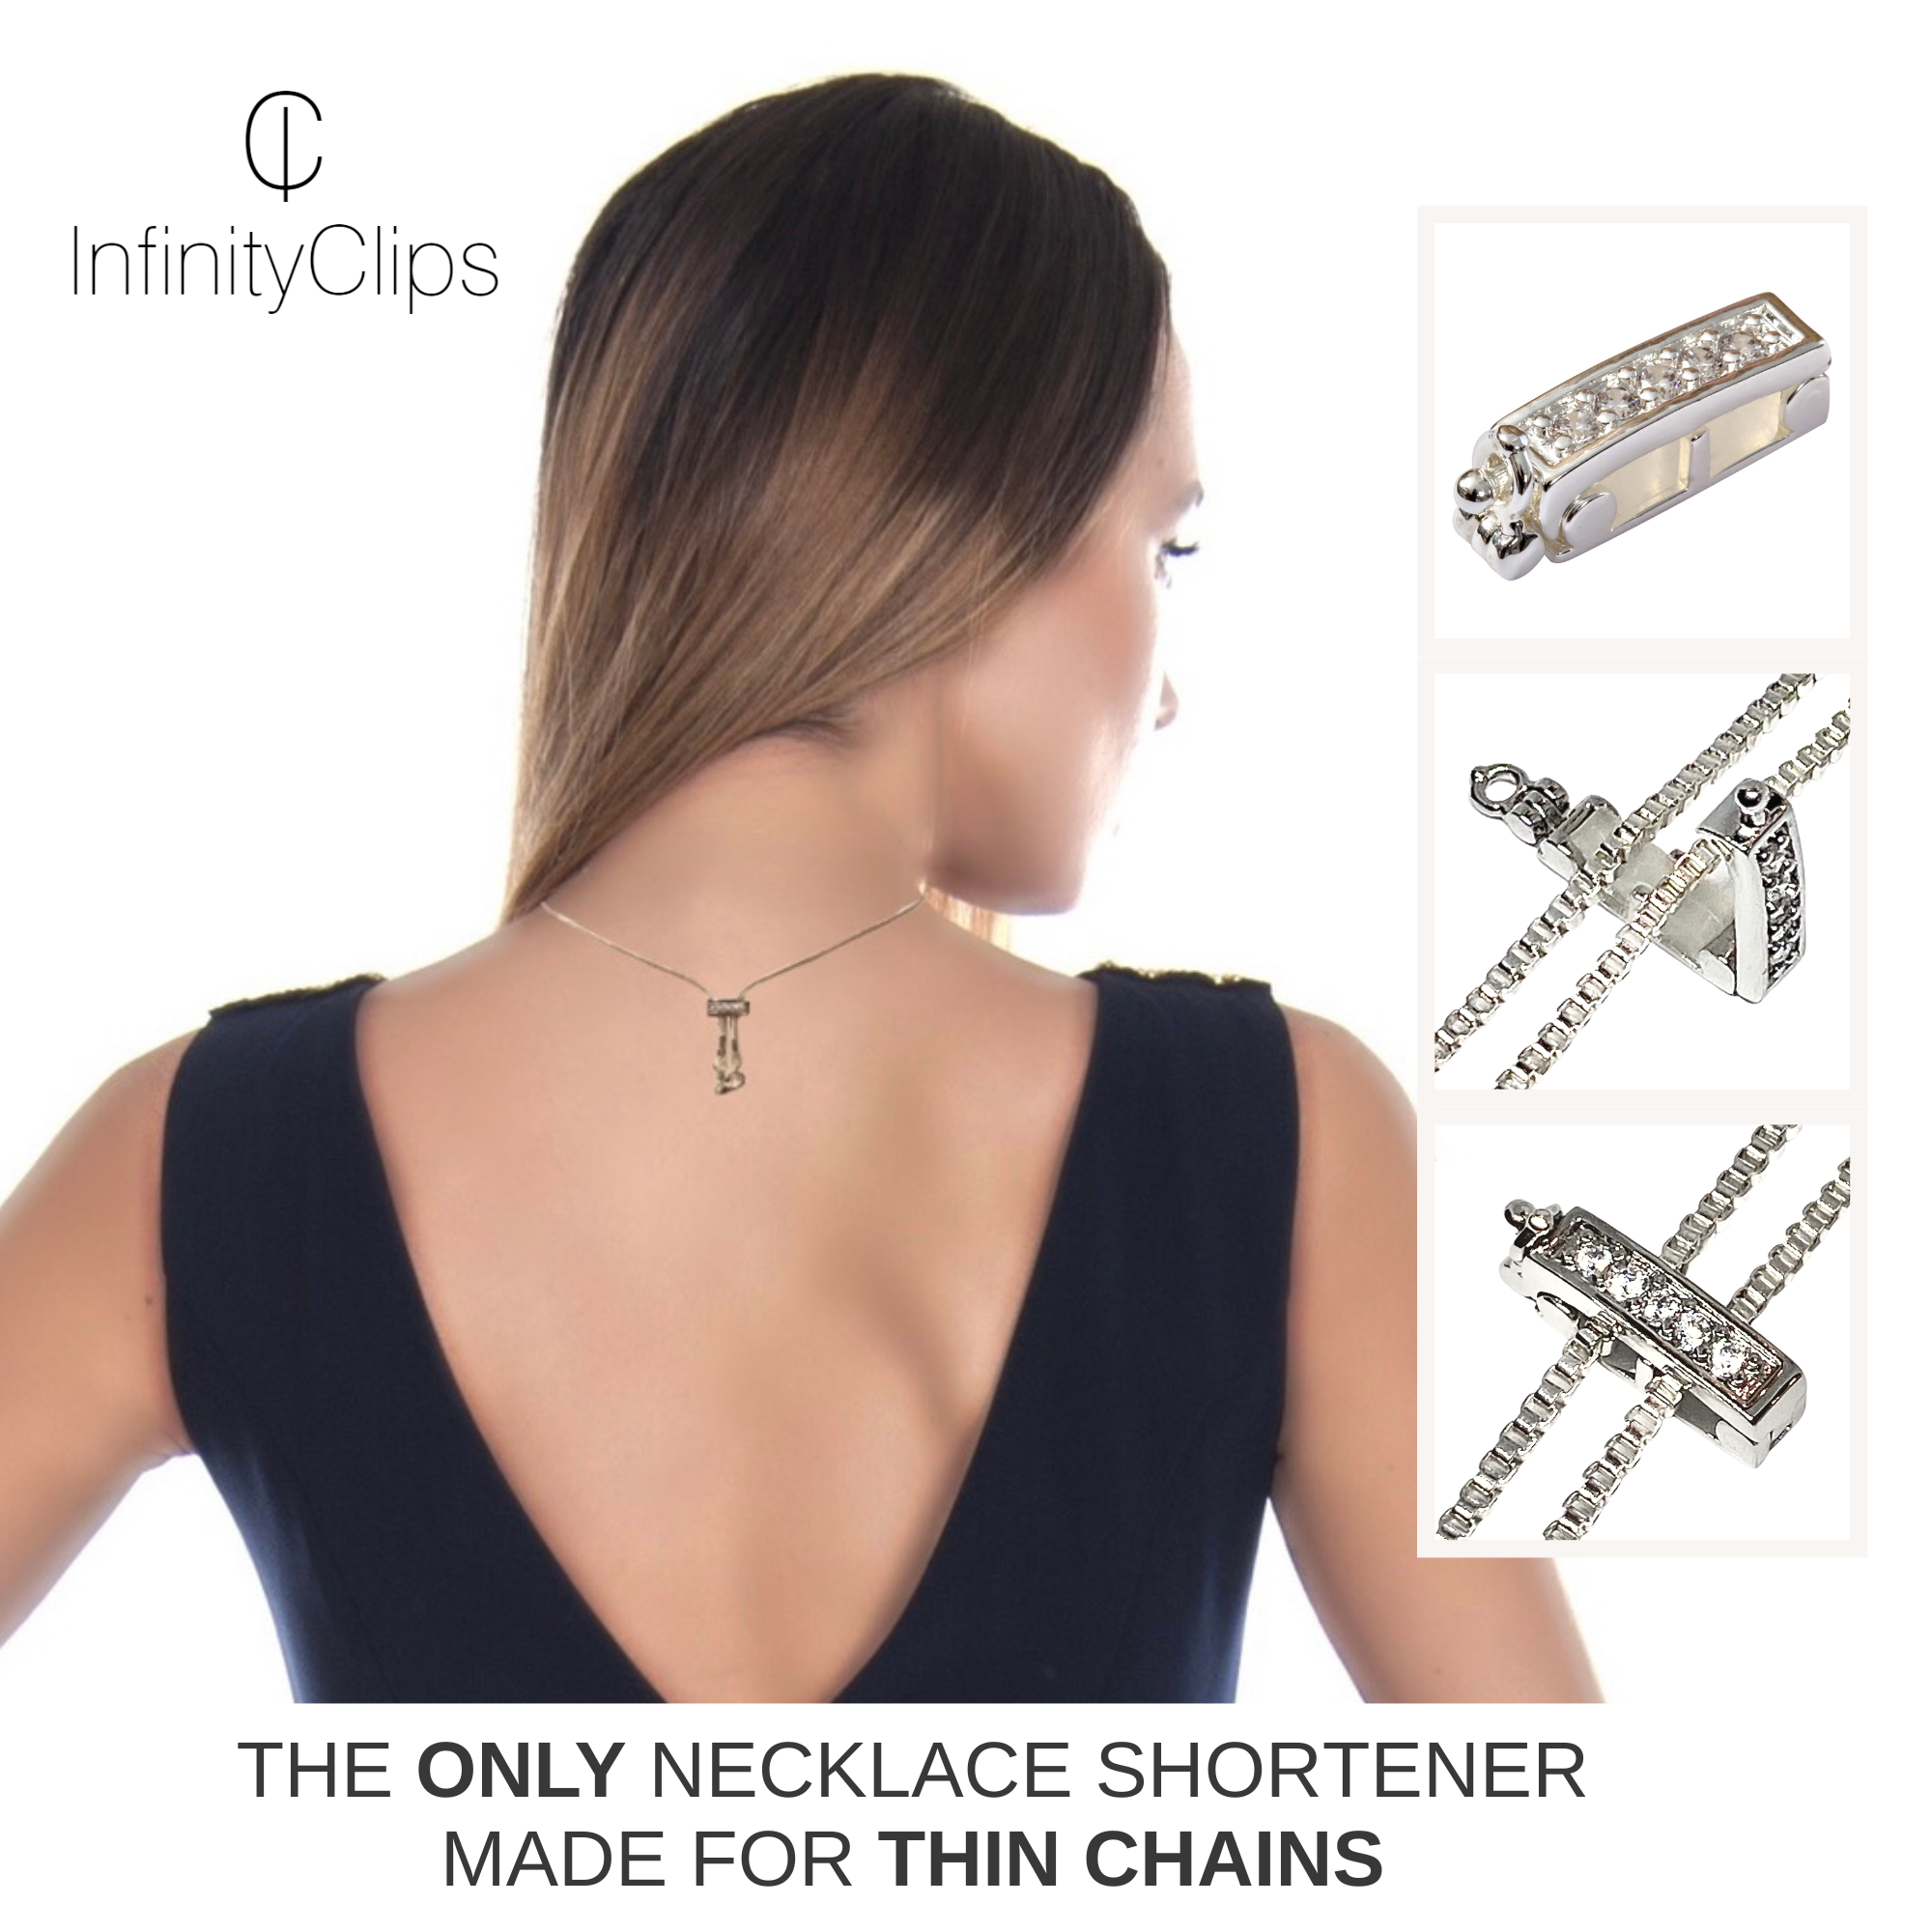 Large Classic Necklace Chain Shortener (Silver) | InfinityClips